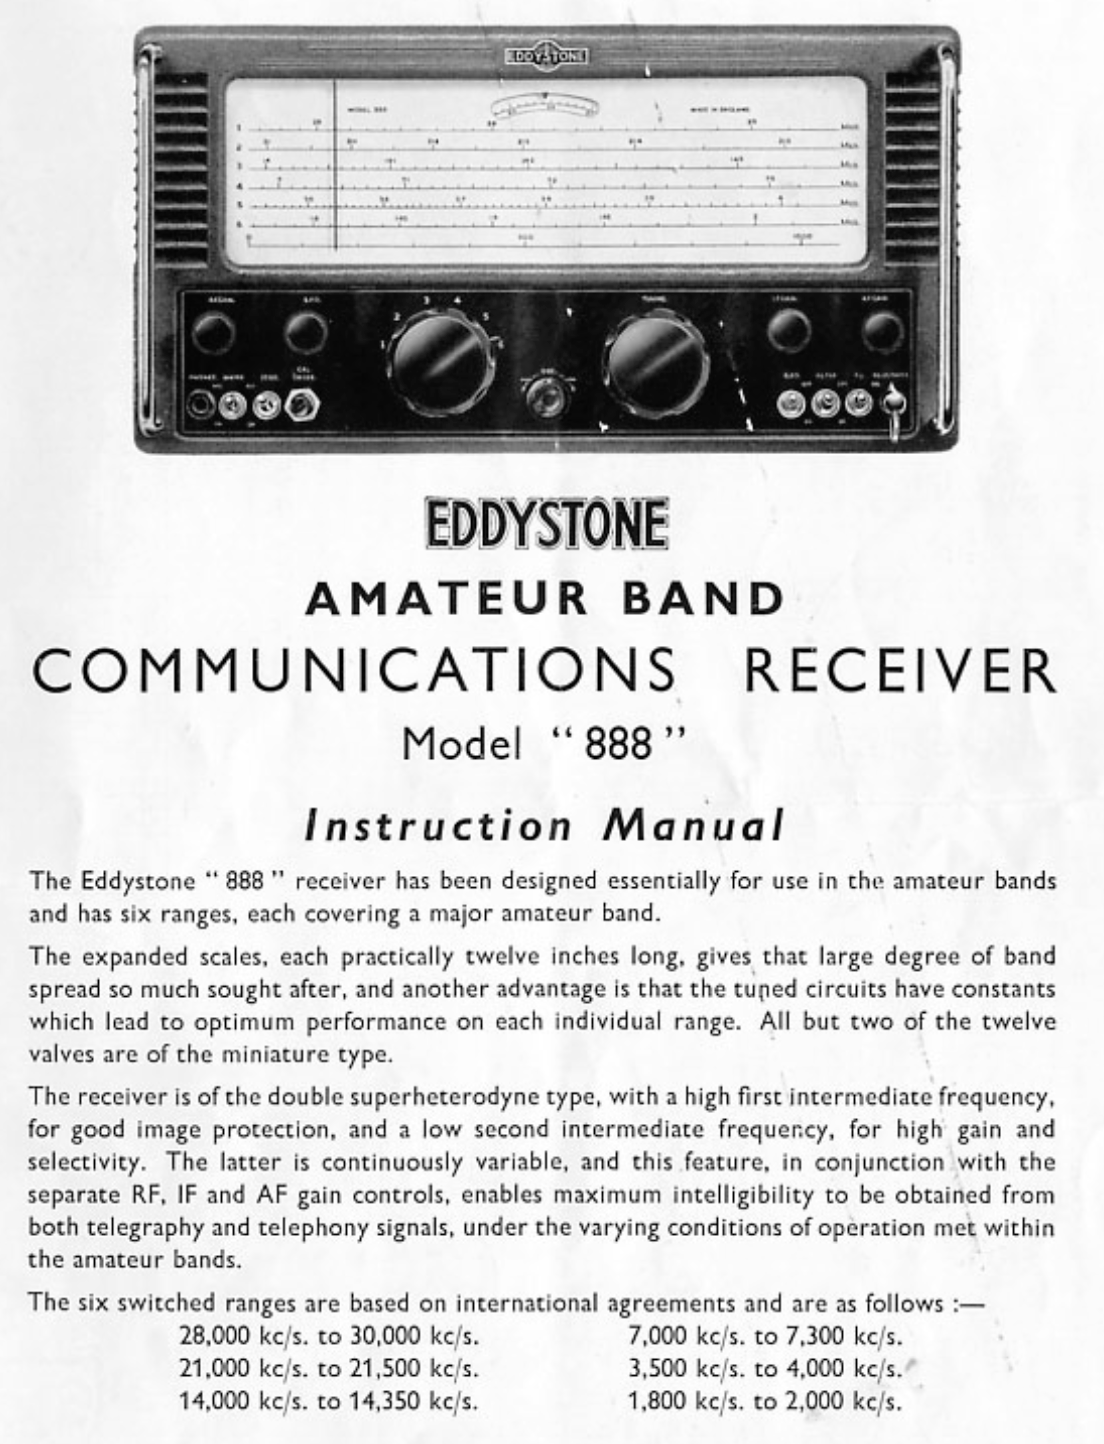 Eddystone Type 888 Amateur Band Communications Receiver - Instruction Manual